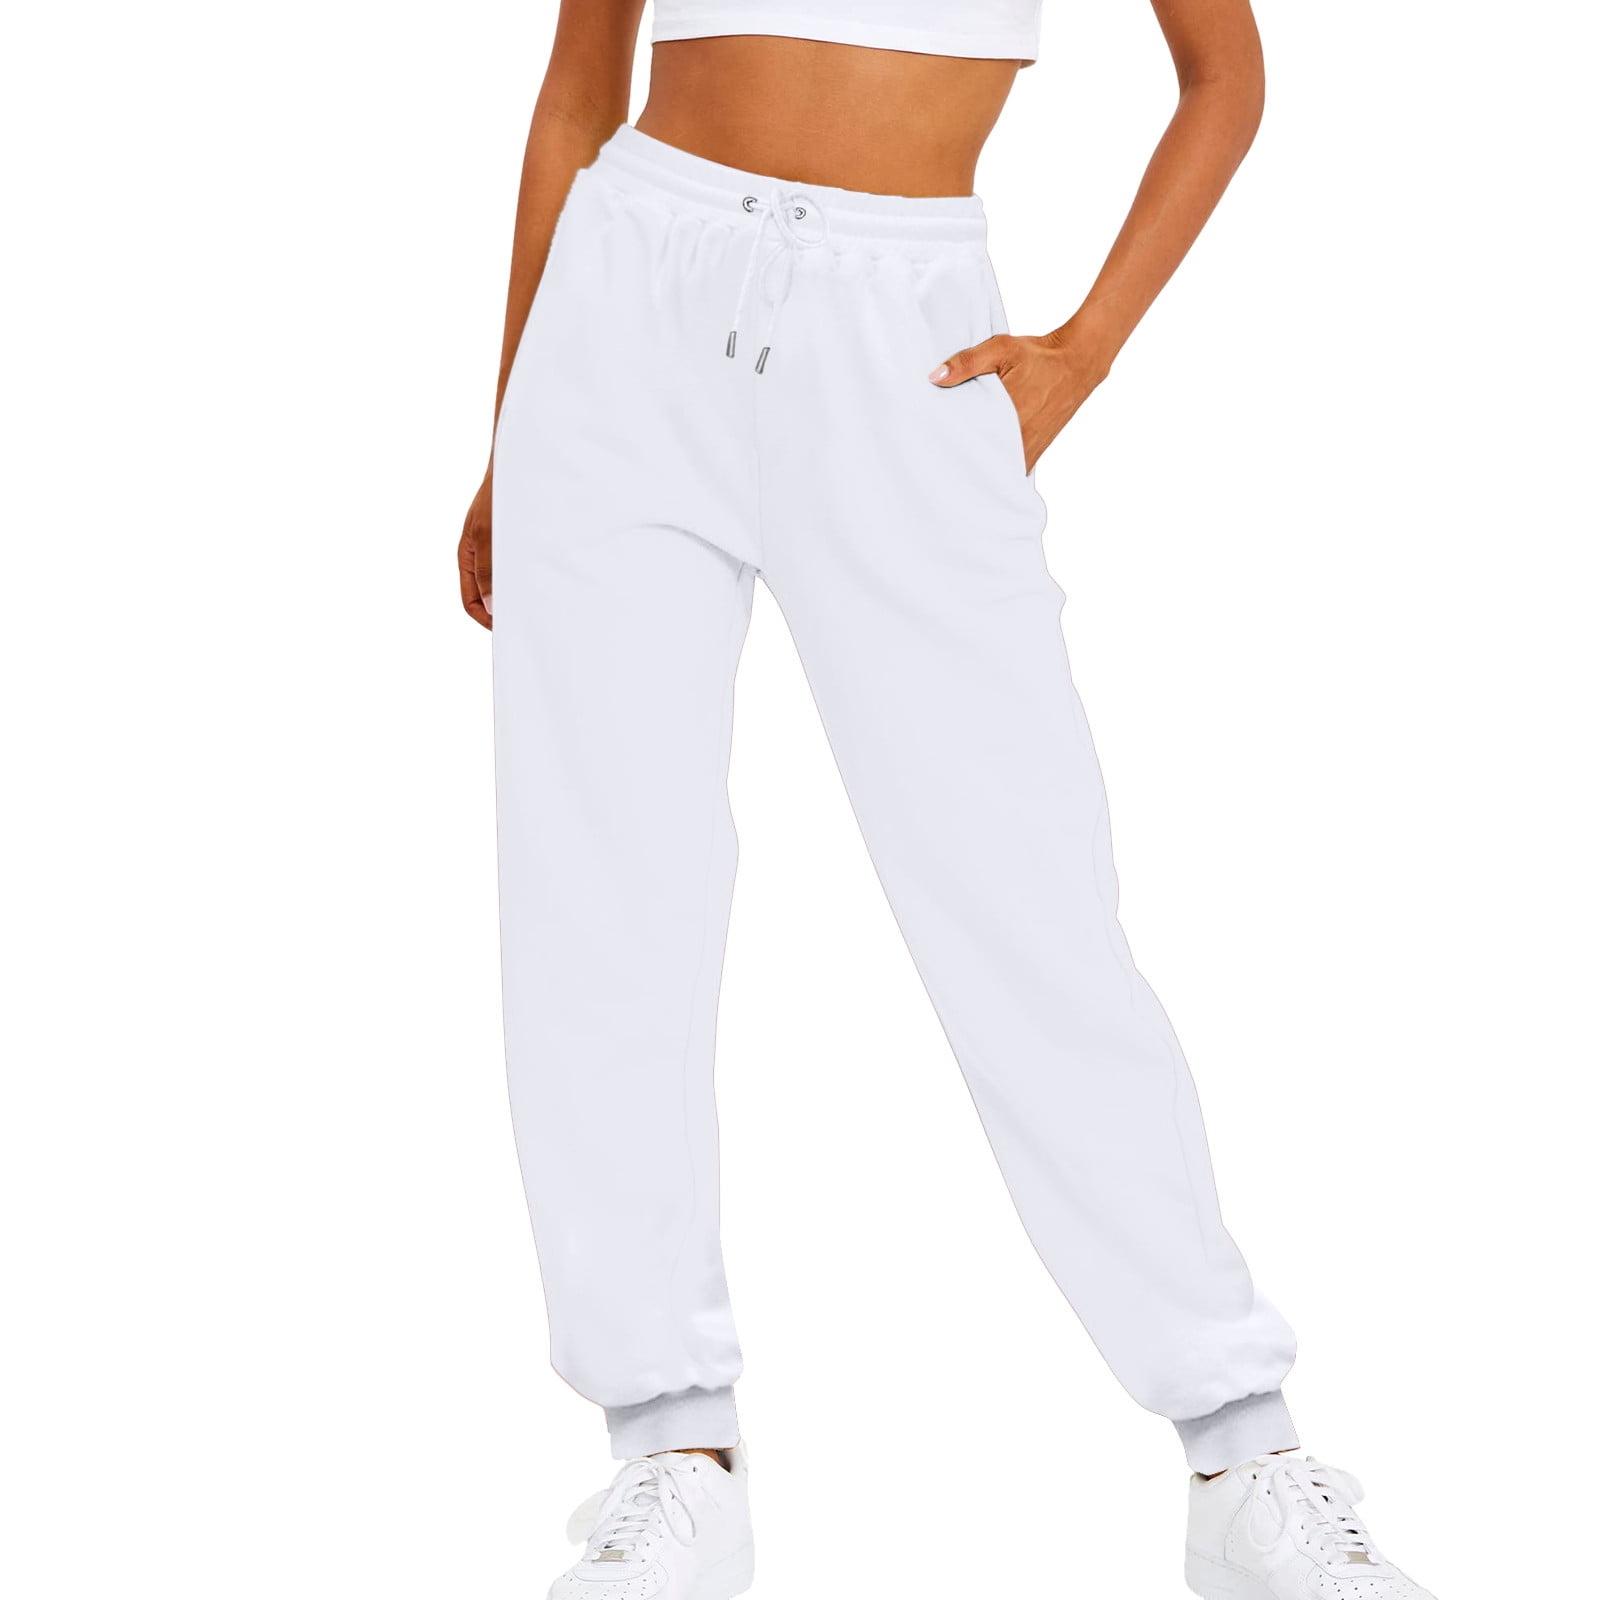 CAICJ98 Sweat Pants For Womens Women's High Waisted Yoga Sweatpants Summer Quick  Dry Casual Pants Lightweight Joggers Drawstring Pants White,S 